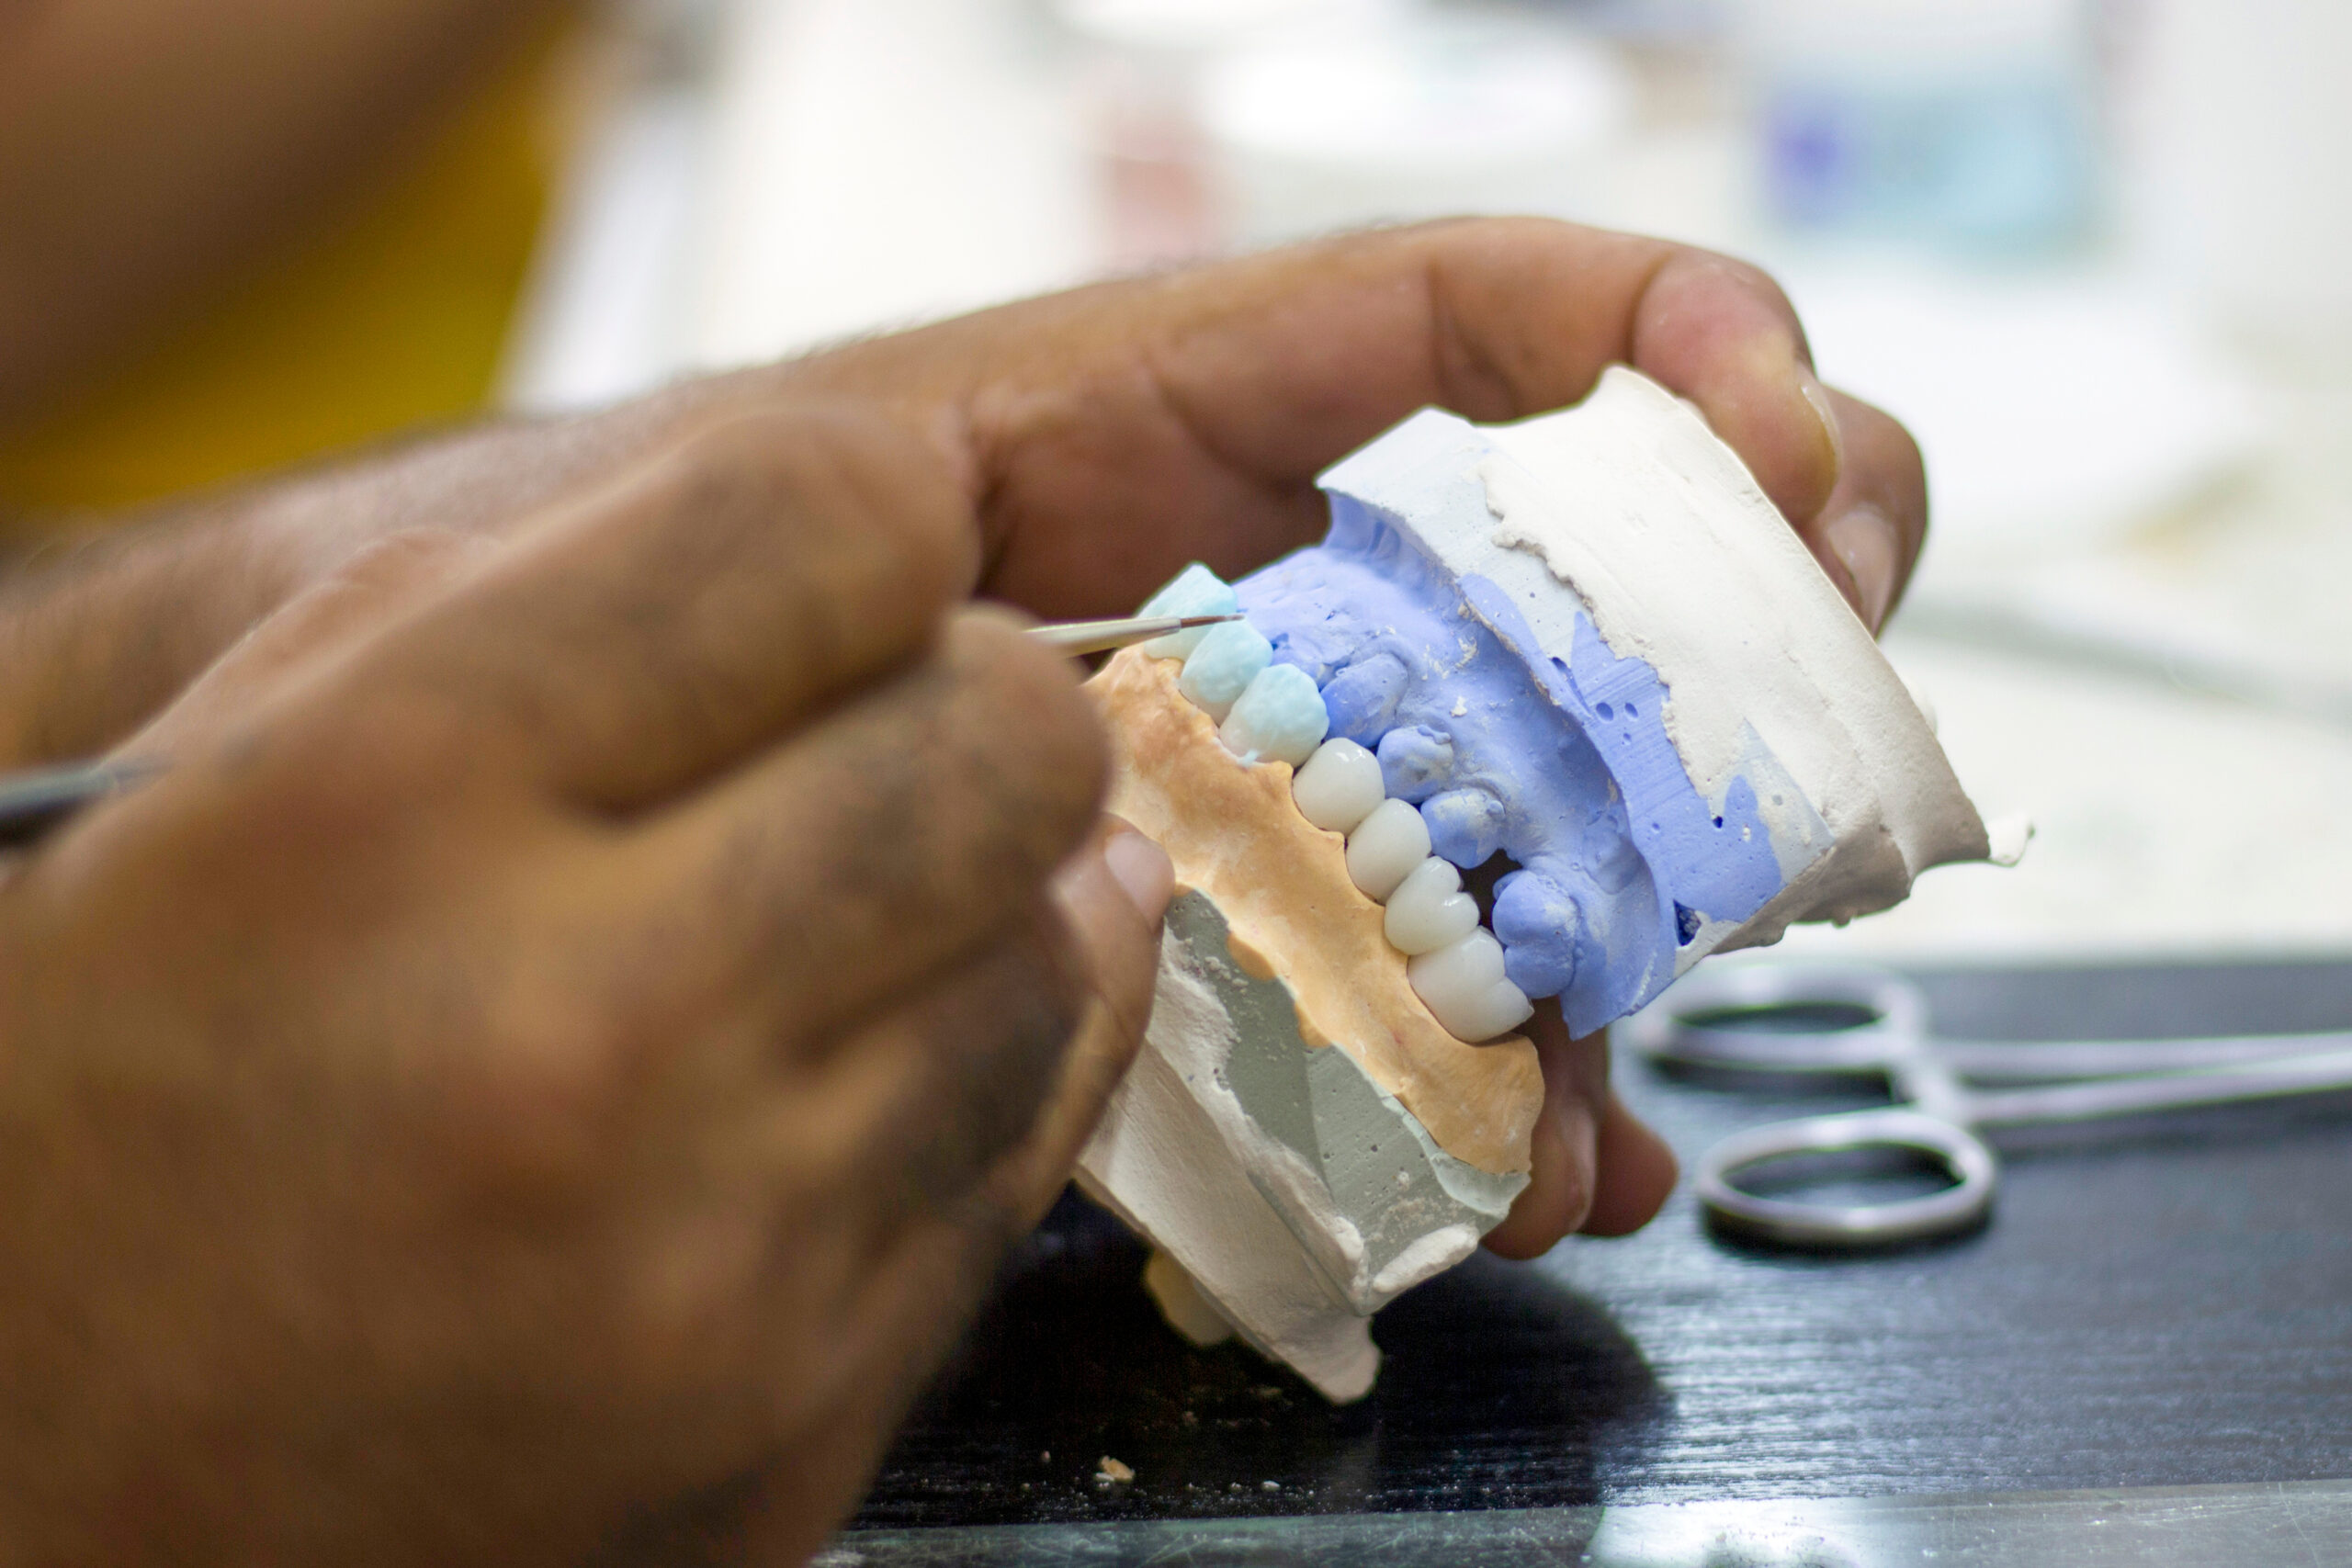 Ready To See If You Are A Candidate For Full Mouth Dental Implants In Cincinnati, OH?